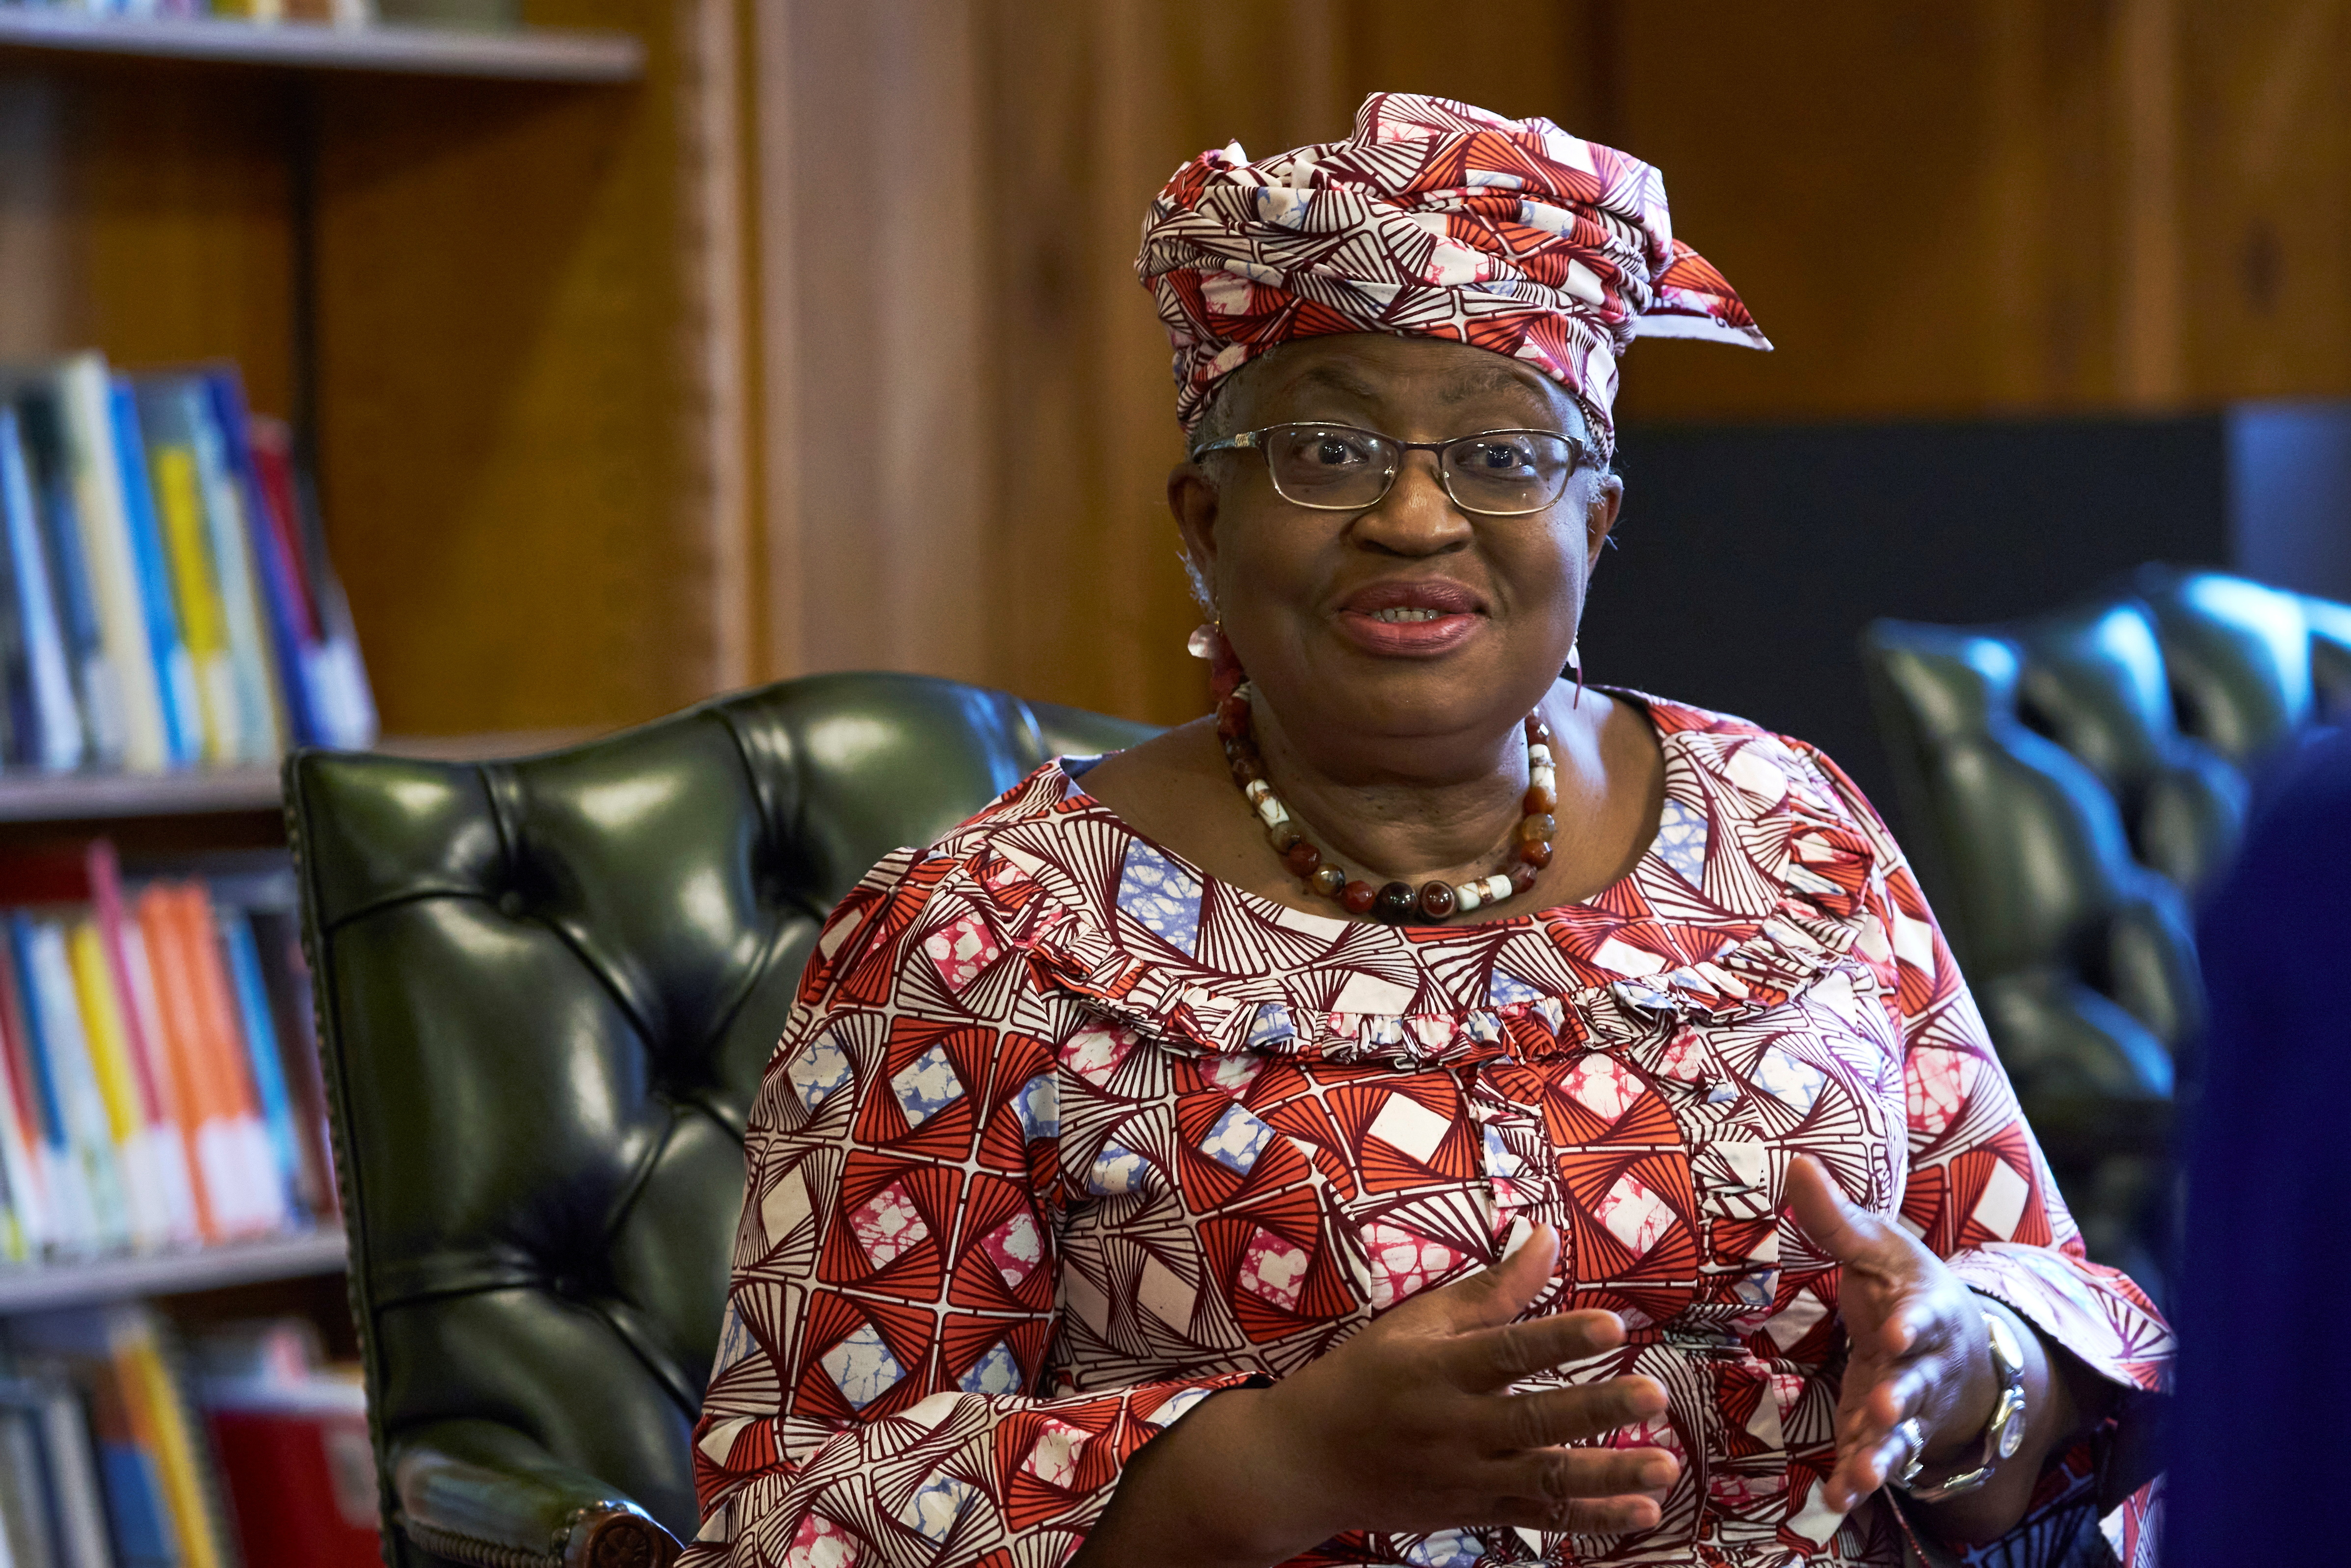 World Trade Organization (WTO) Director-General Ngozi Okonjo-Iweala speaks during an interview for Reuters Next, ahead of the 12th Ministerial Conference (MC12), in Geneva, Switzerland, November 25, 2021. REUTERS/Denis Balibouse/File Photo